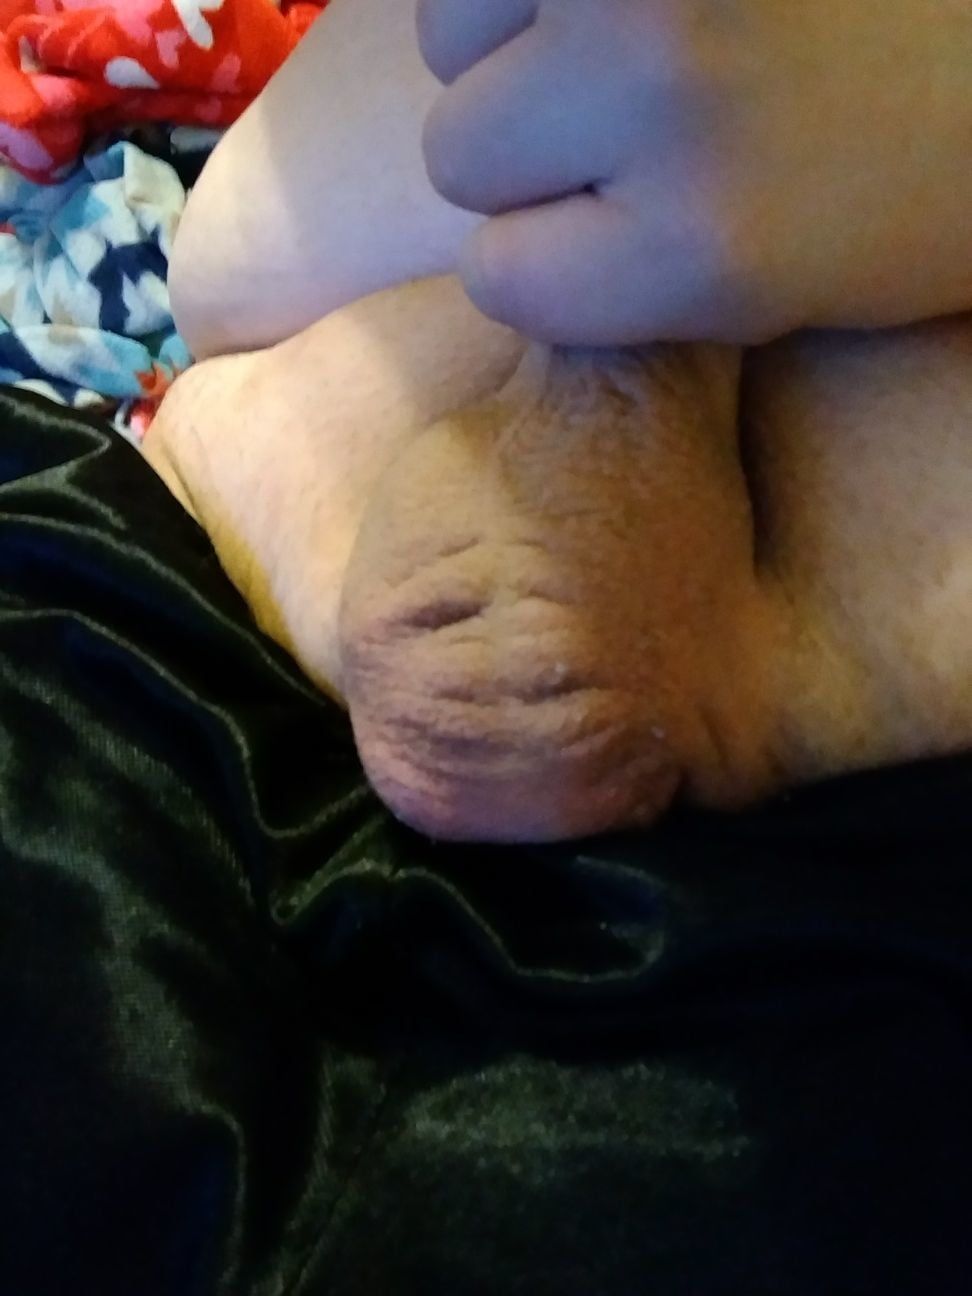 newer pics of my penis or balls #57